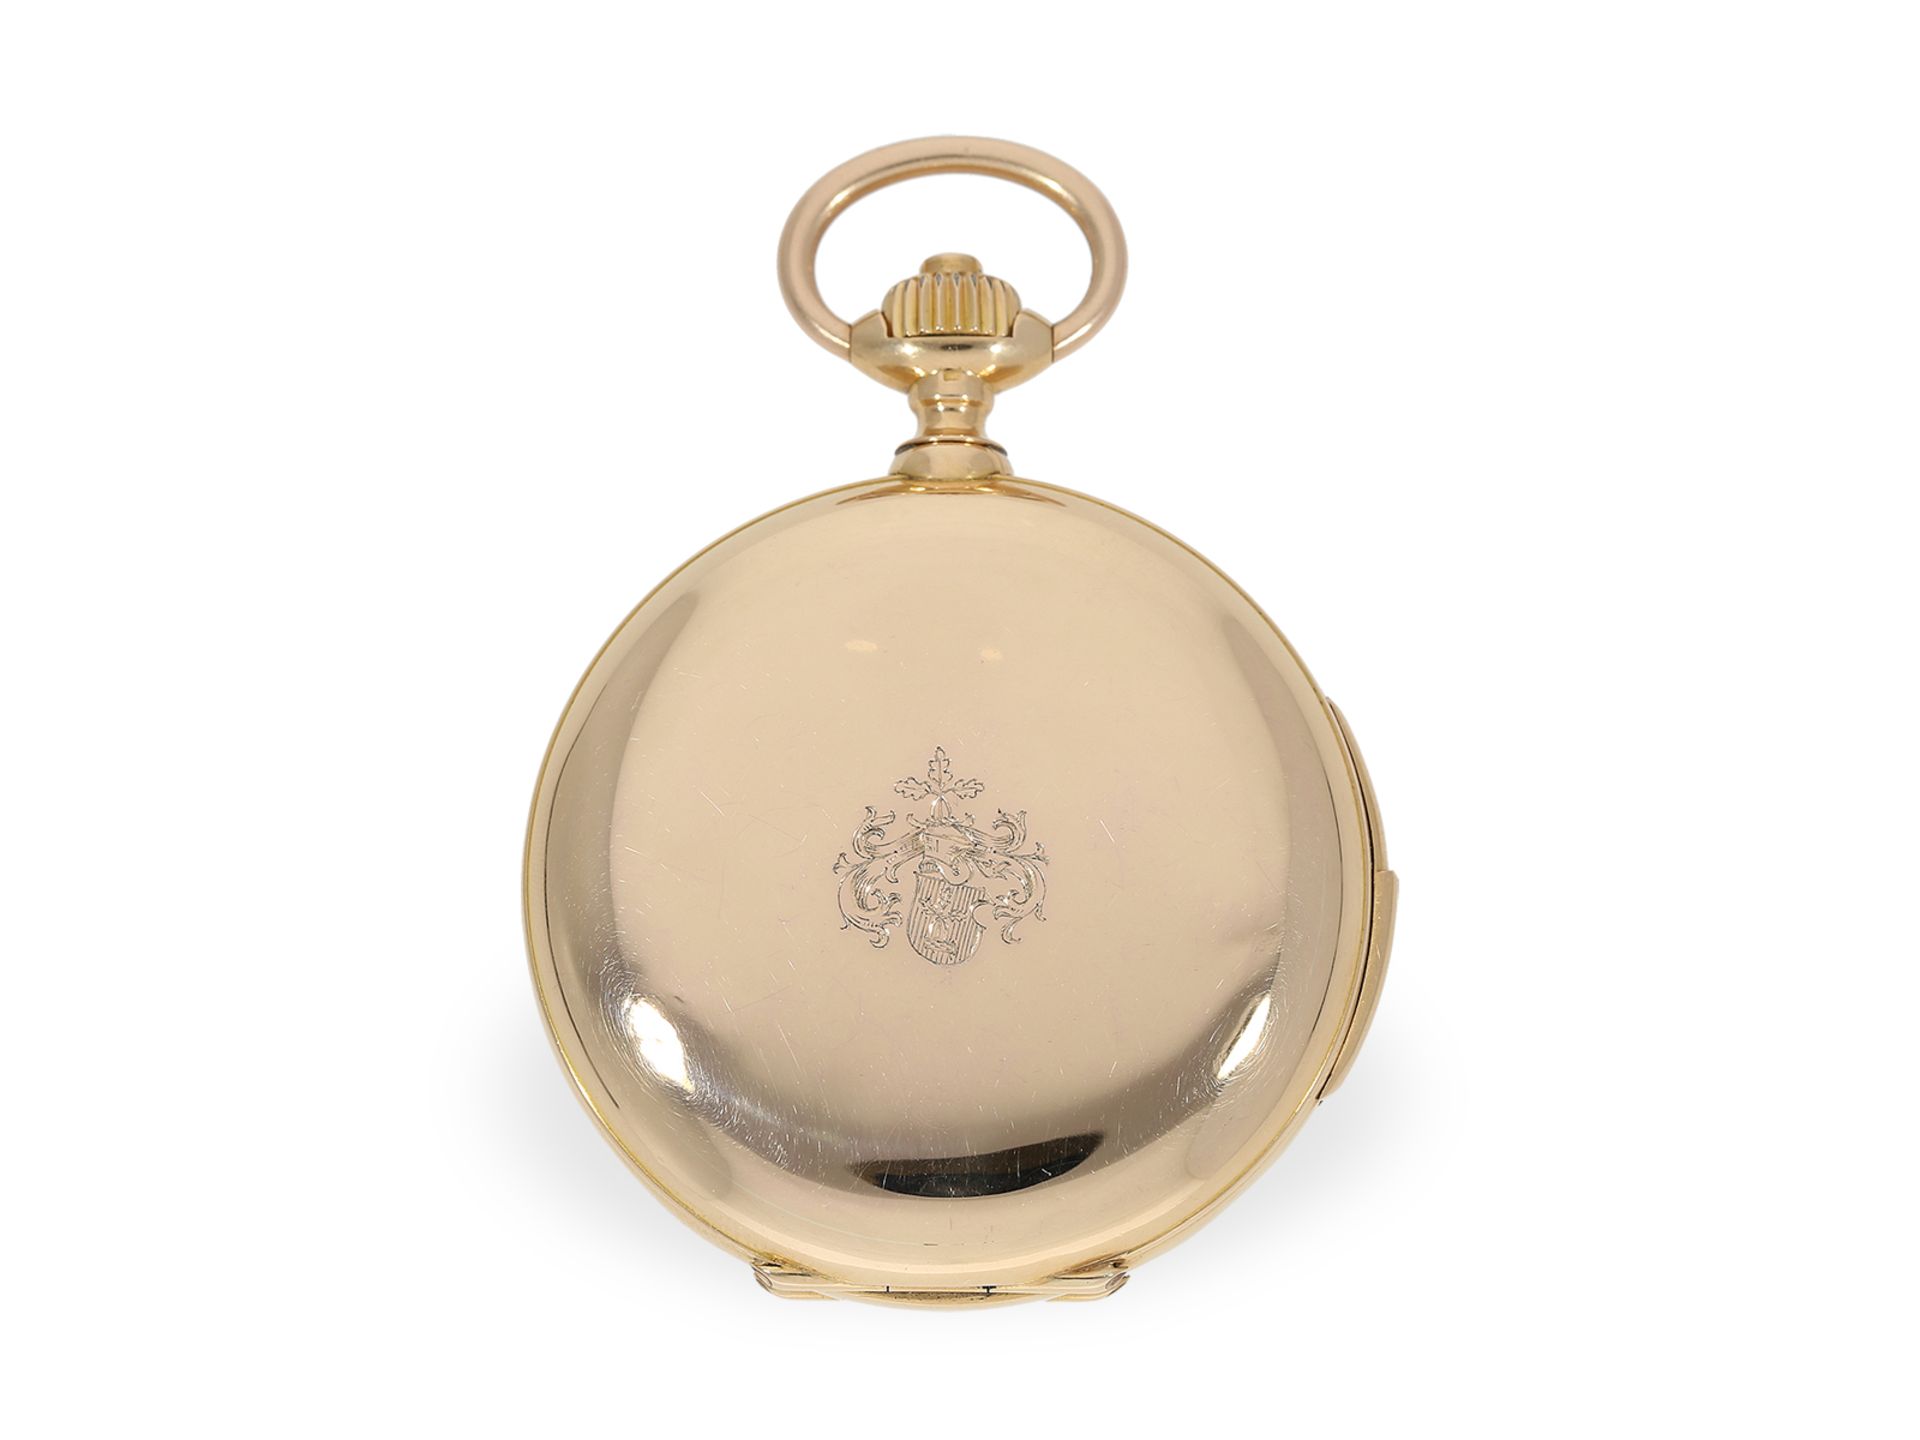 Pocket watch: very fine gold hunting case watch with repeater, probably Audemars Freres, ca. 1880 - Image 6 of 7